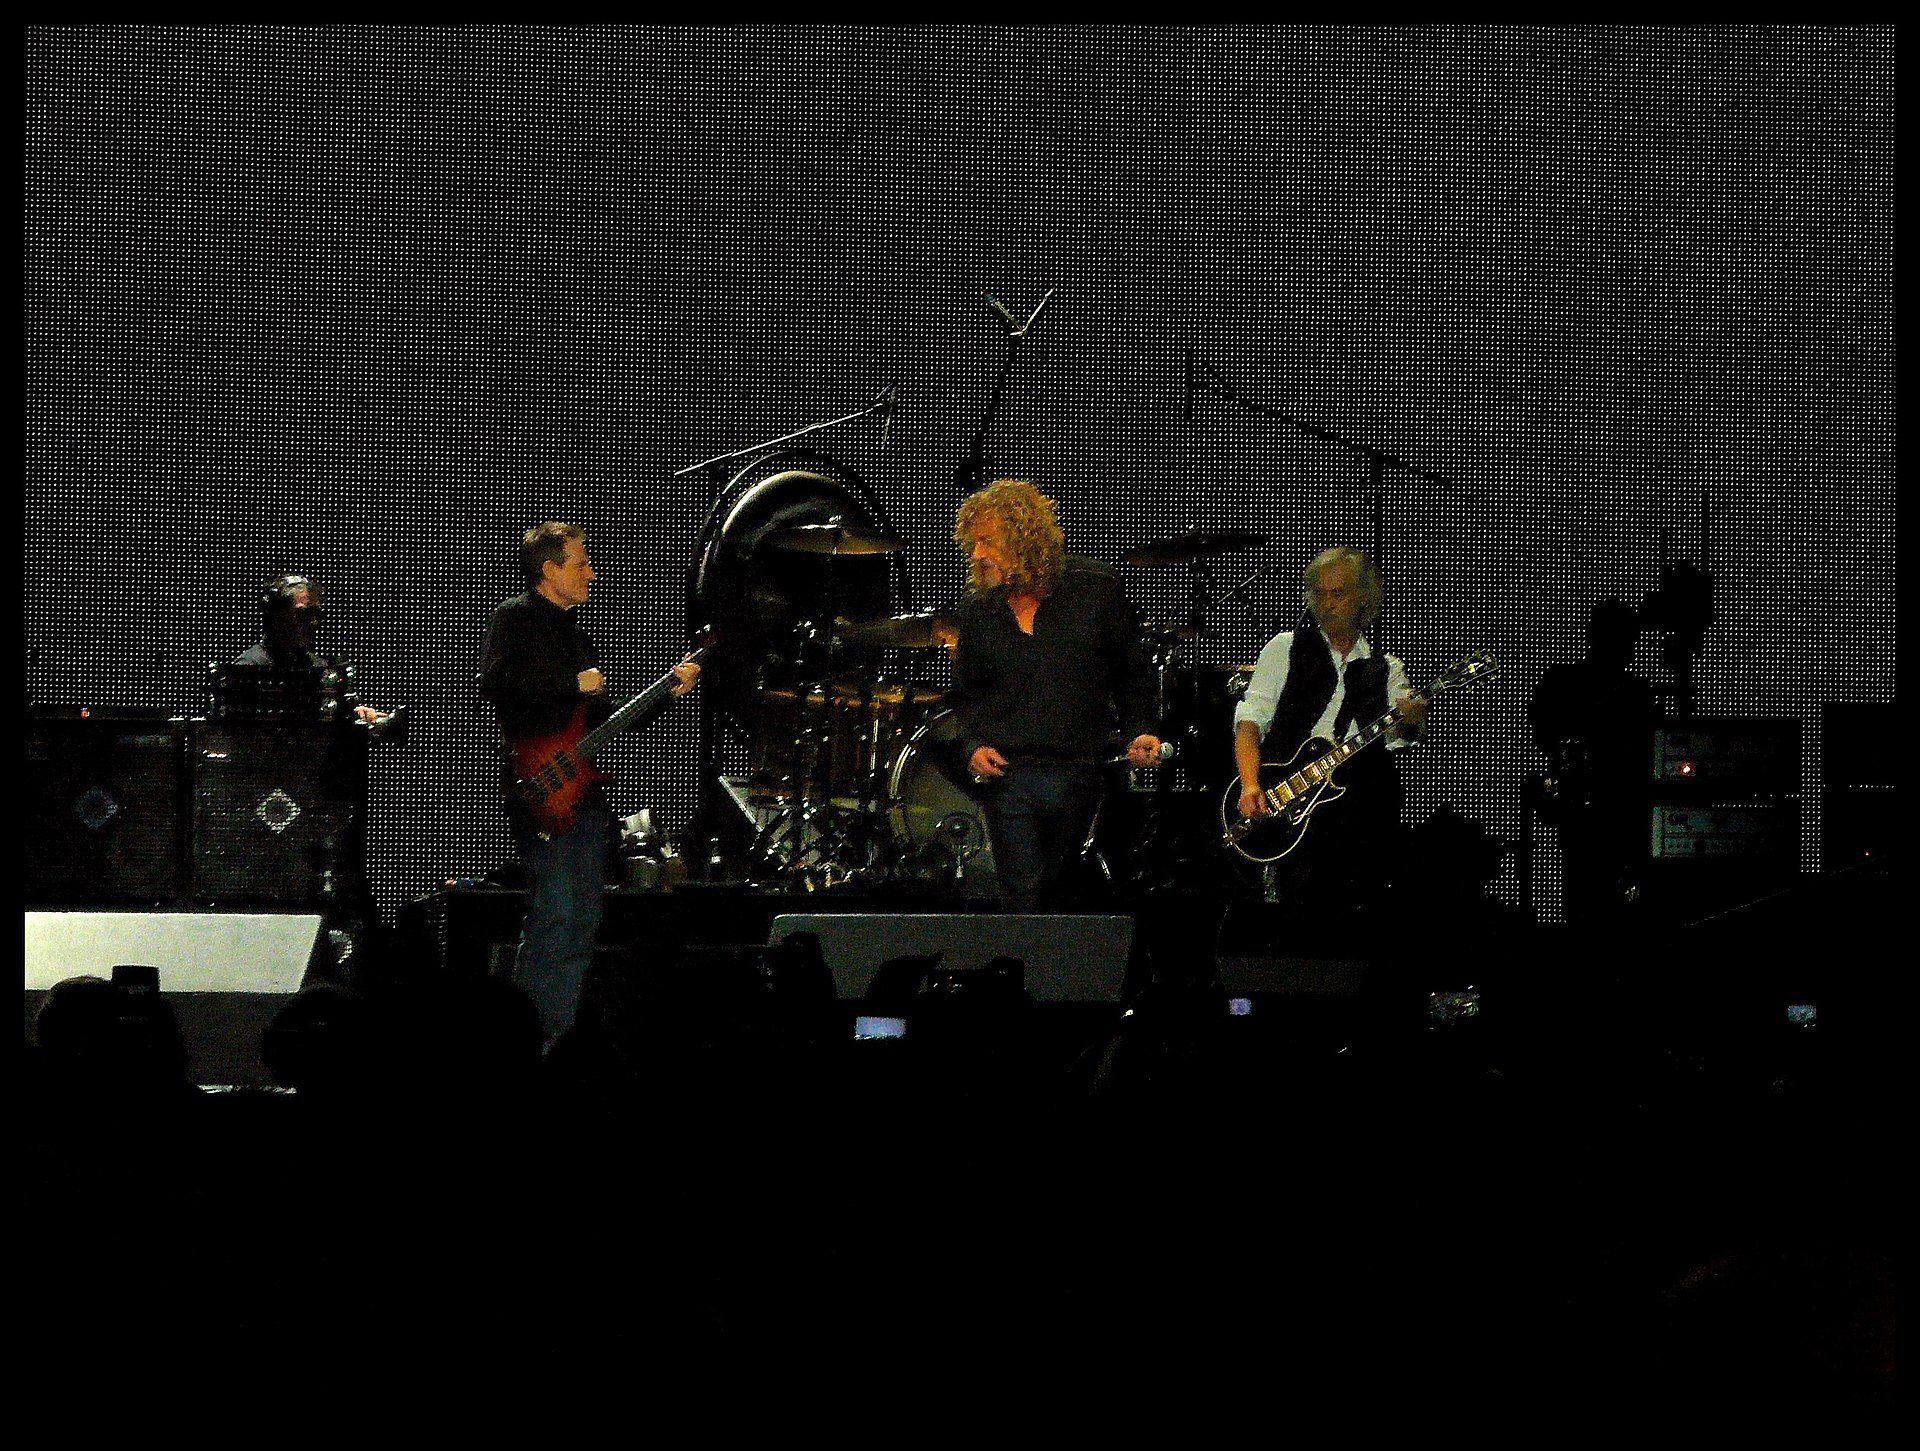 <p>Robert Plant, Jimmy Page, and John Paul Jones <a href="https://www.rollingstone.com/music/music-news/flashback-led-zeppelin-reunite-badly-at-live-aid-201610/">reunited</a> to play the Live Aid concerts in 1985 and 1988. The band reunited again in 2007 for a benefit show — with the late Bonham's son filling in on drums.</p>